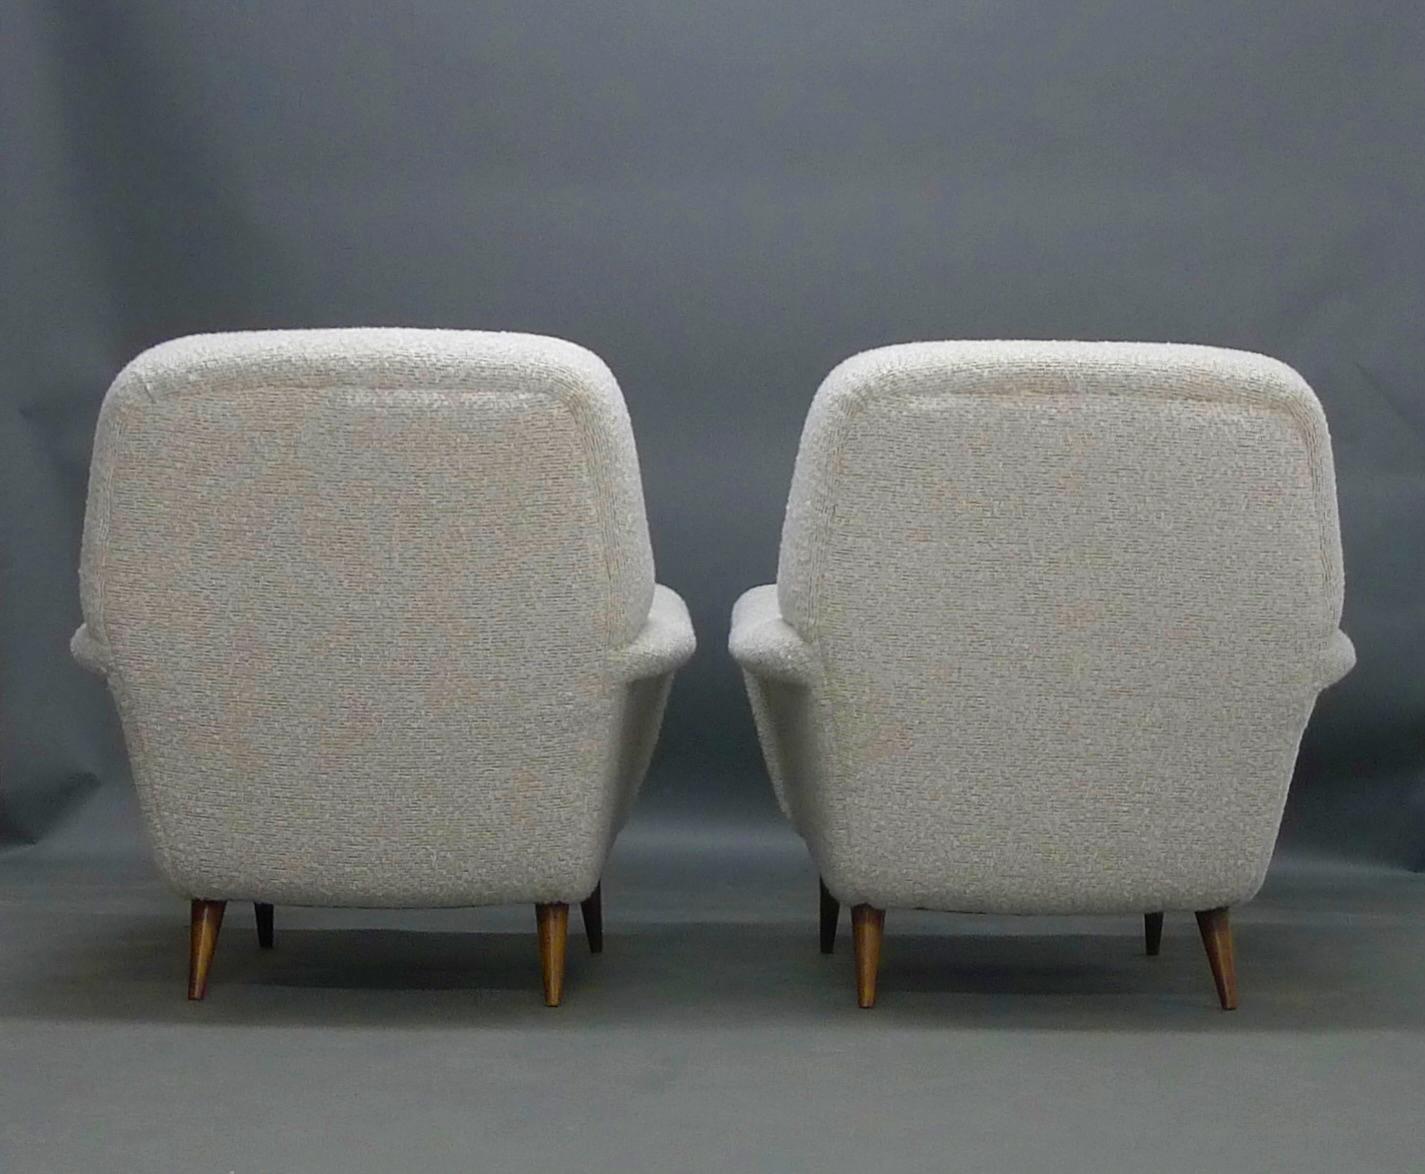 Italian Gianfranco Frattini, Pair of Upholstered Armchairs, model 830, by Cassina, 1950s For Sale